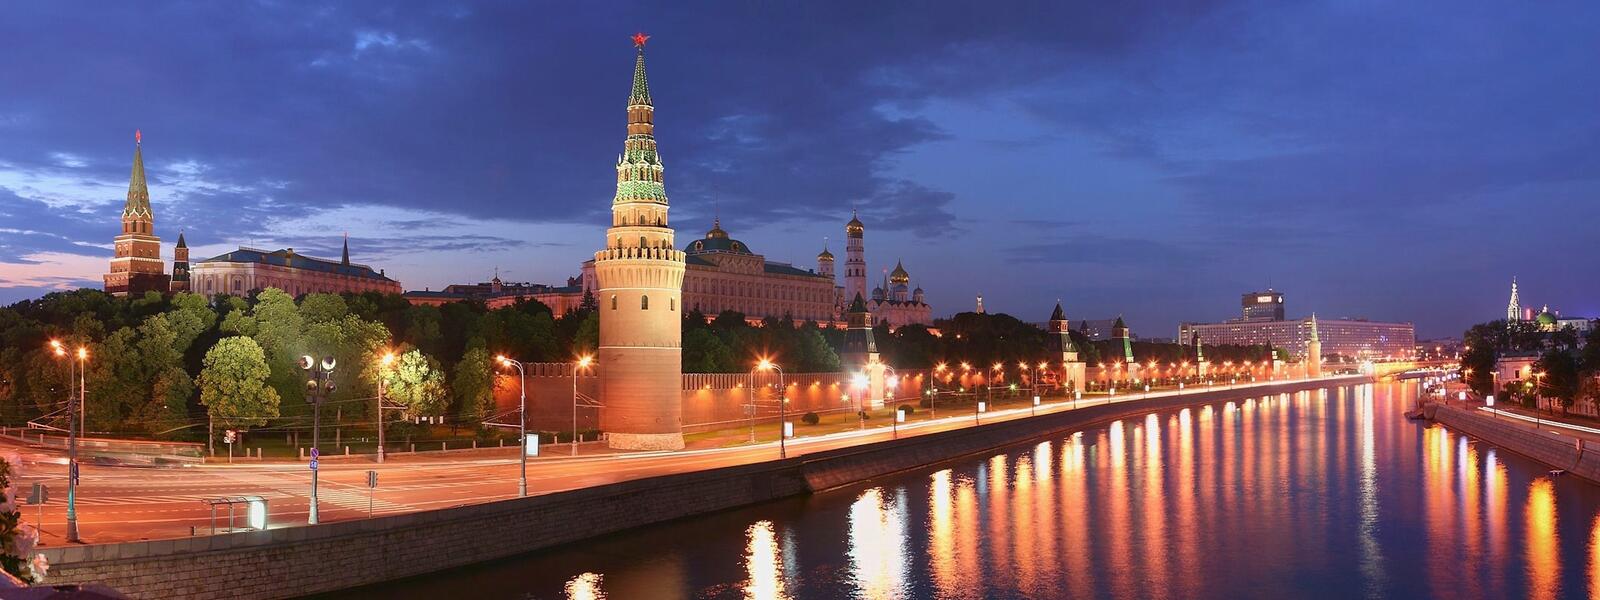 Wallpapers Moscow The Capital The Kremlin on the desktop